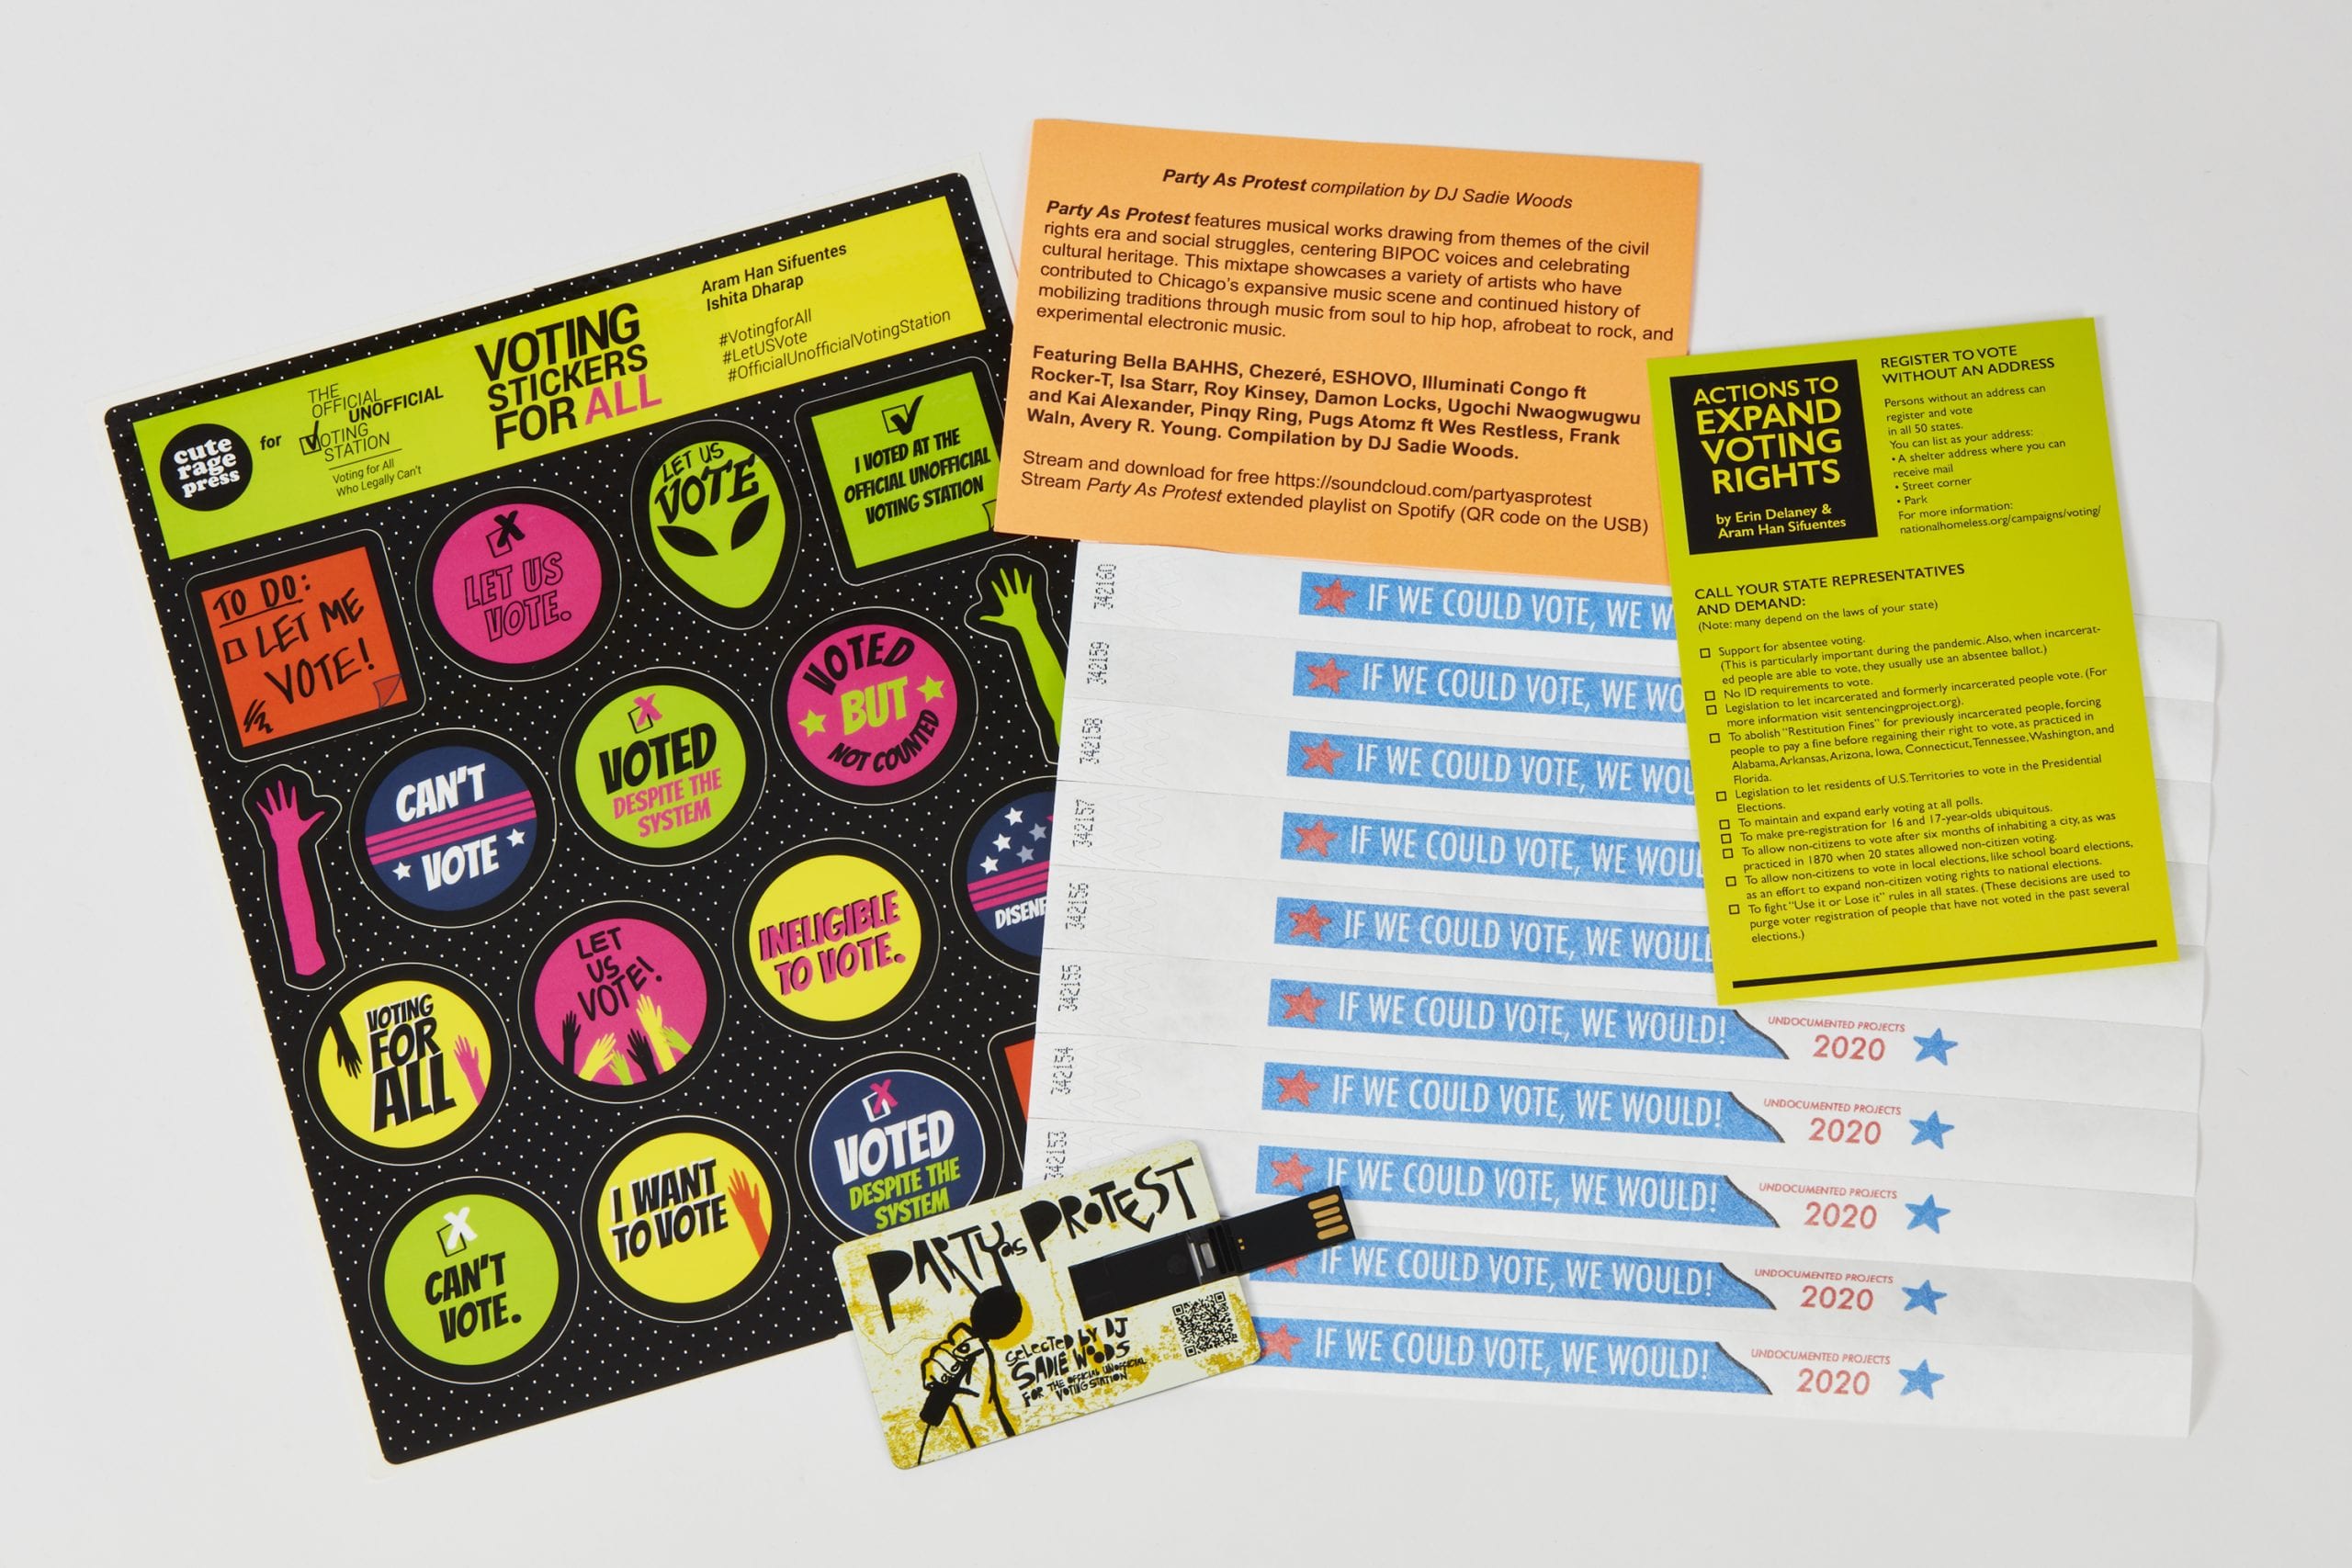 Colorful branded stickers and wristbands, a USB stick with music, and "Expand Voting Rights" flyers